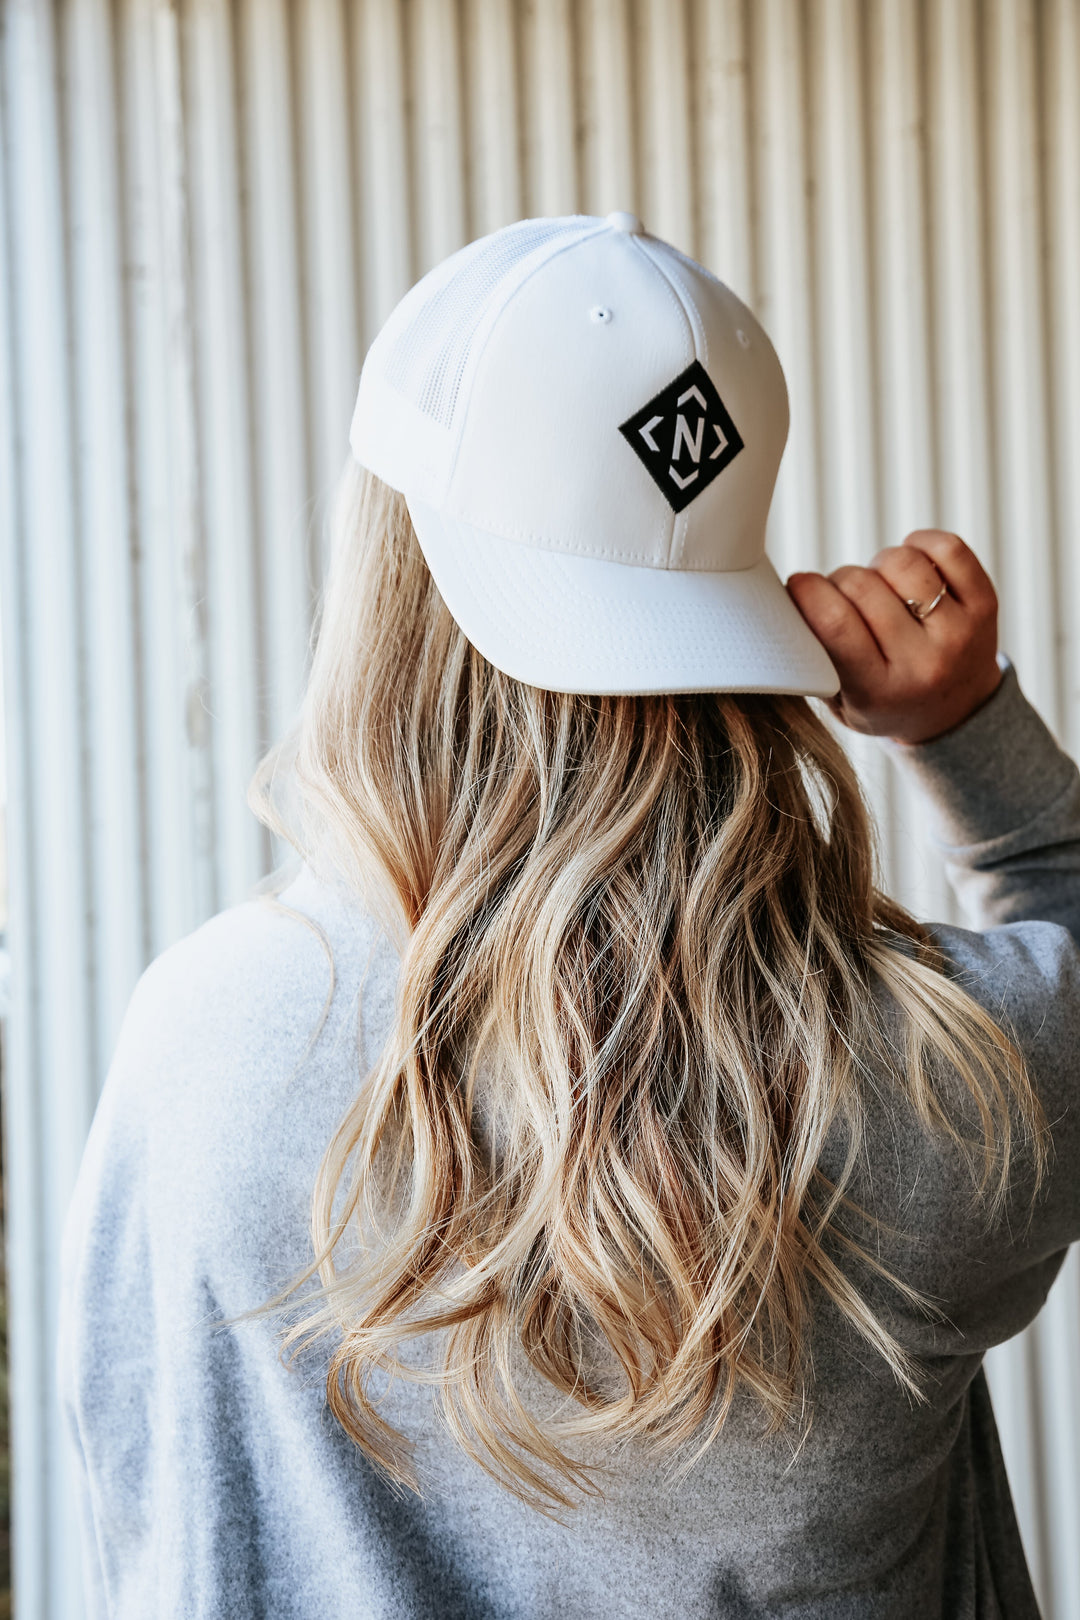 – HEADWEAR ICONIC The ALL Collection Nash